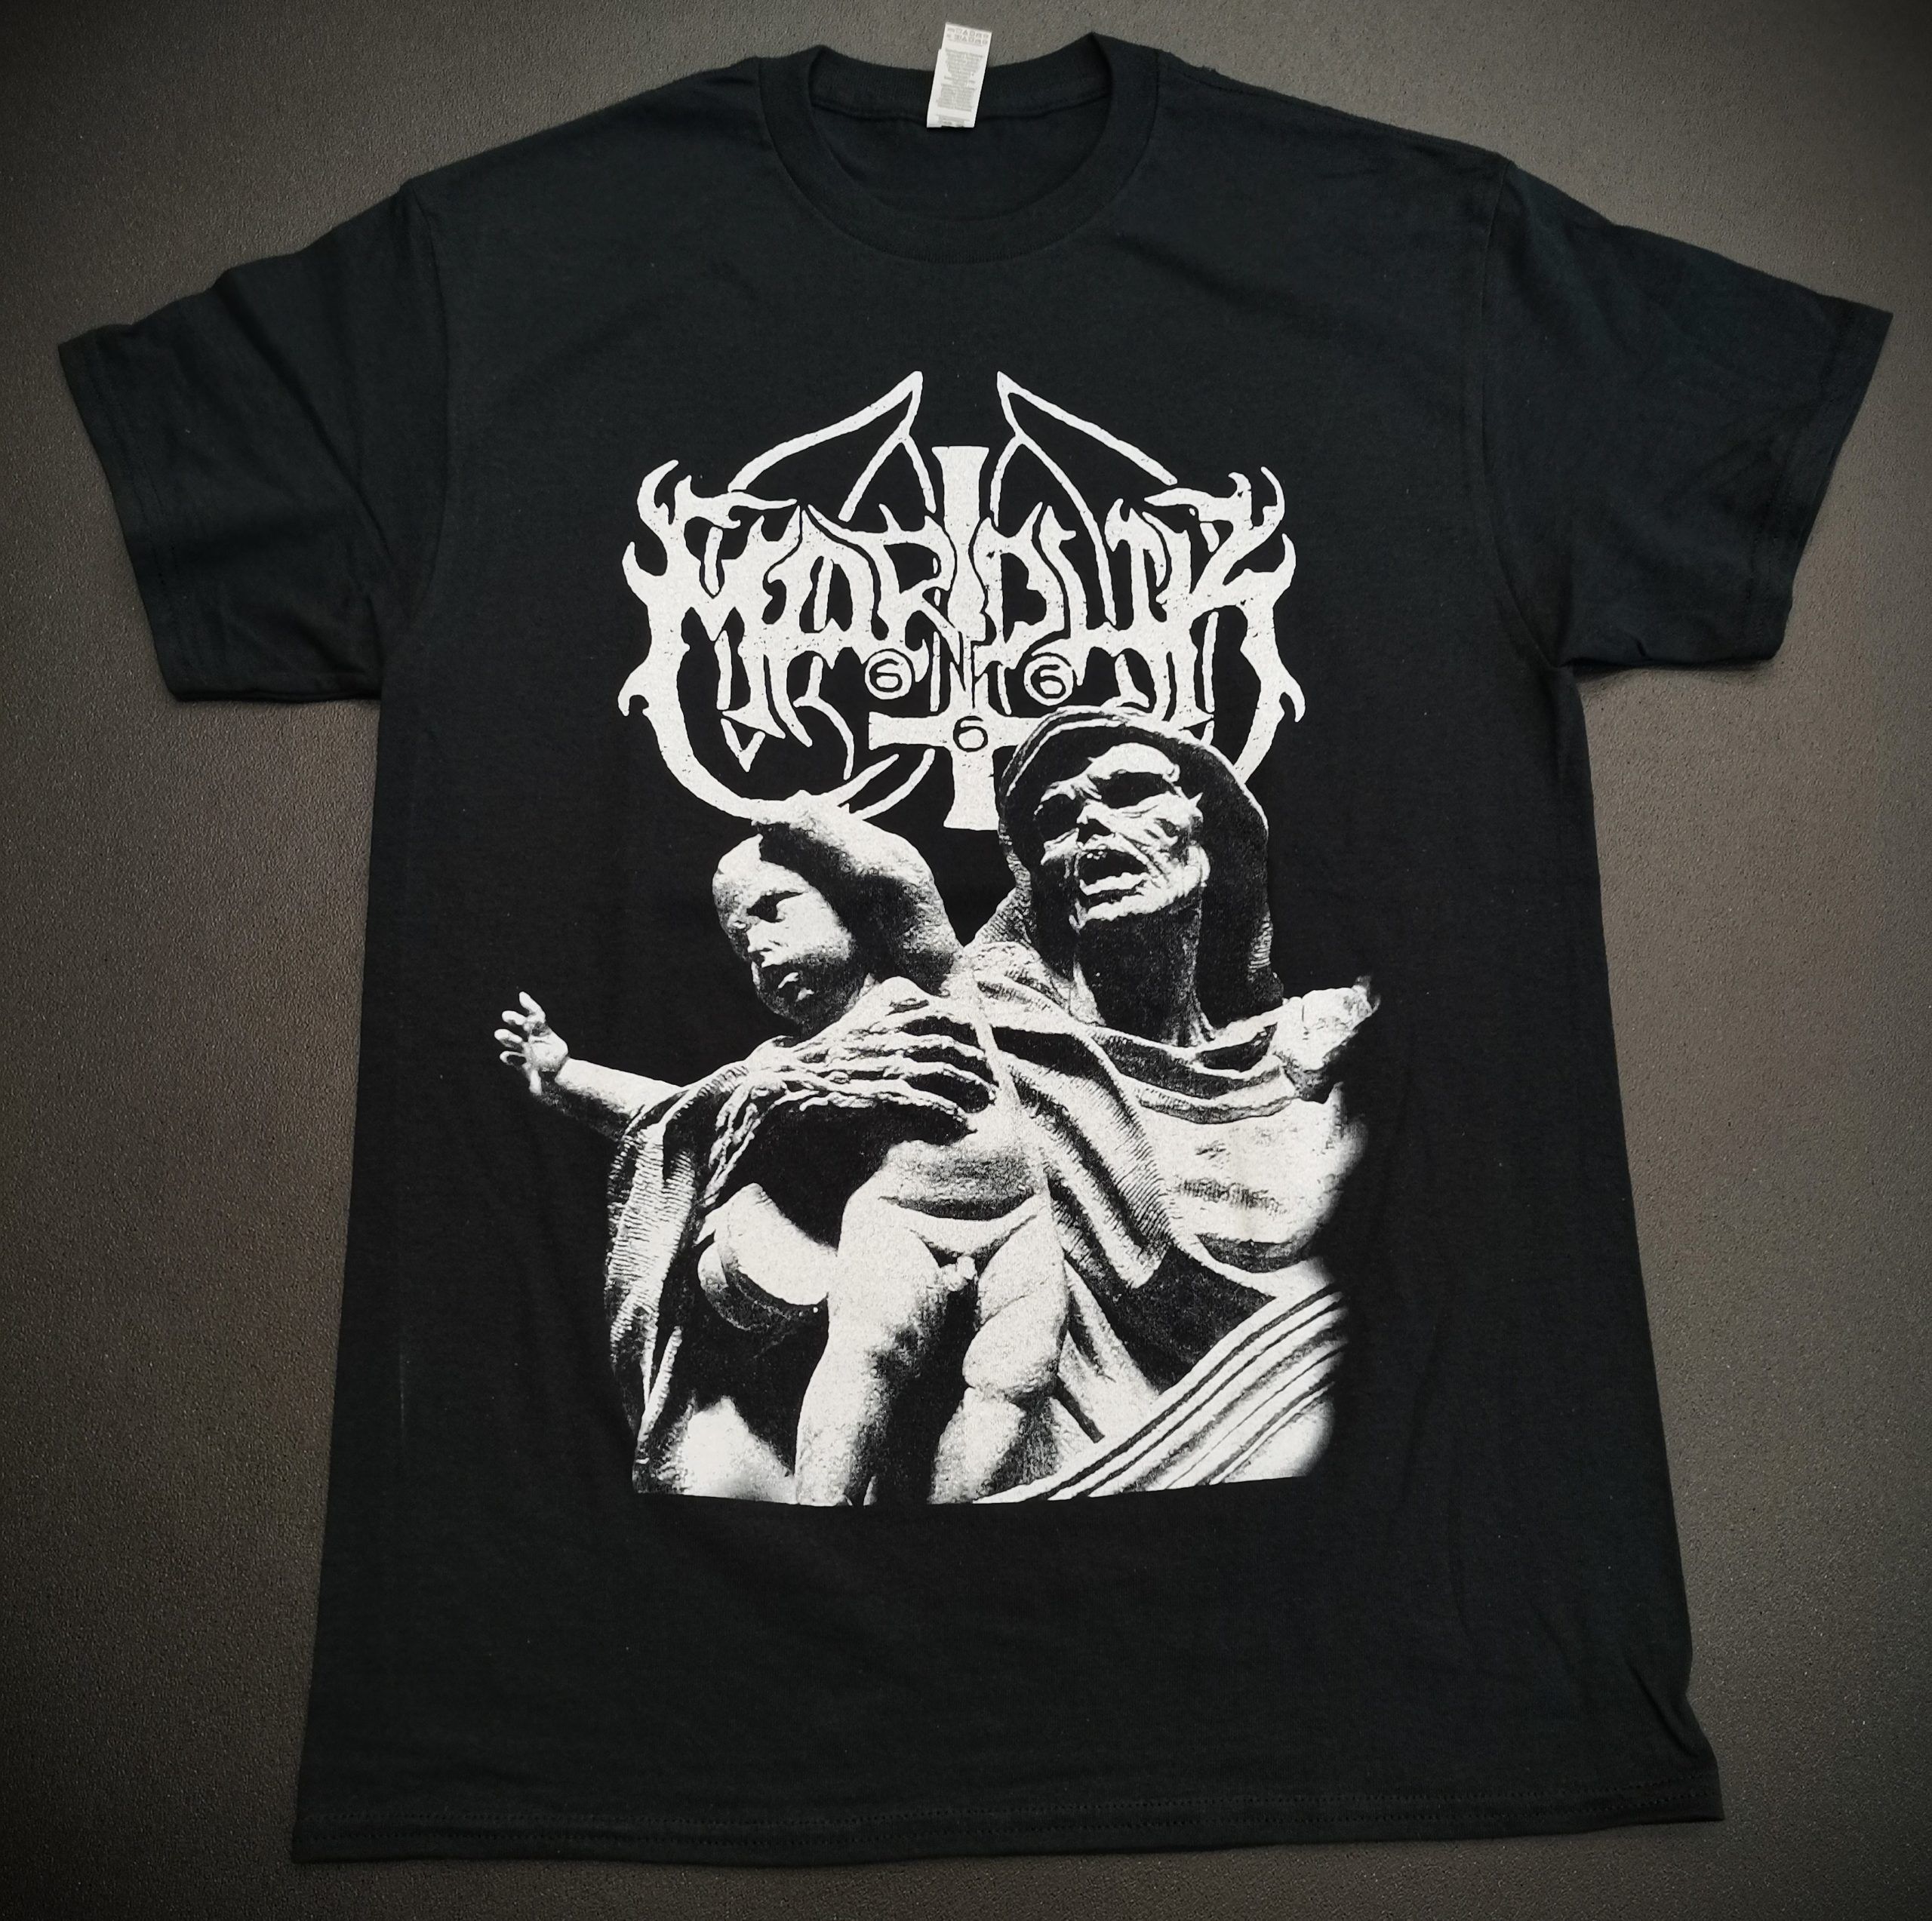 Marduk (SWE) - Plague Angel - T-Shirt - Darkness Shall Rise Productions